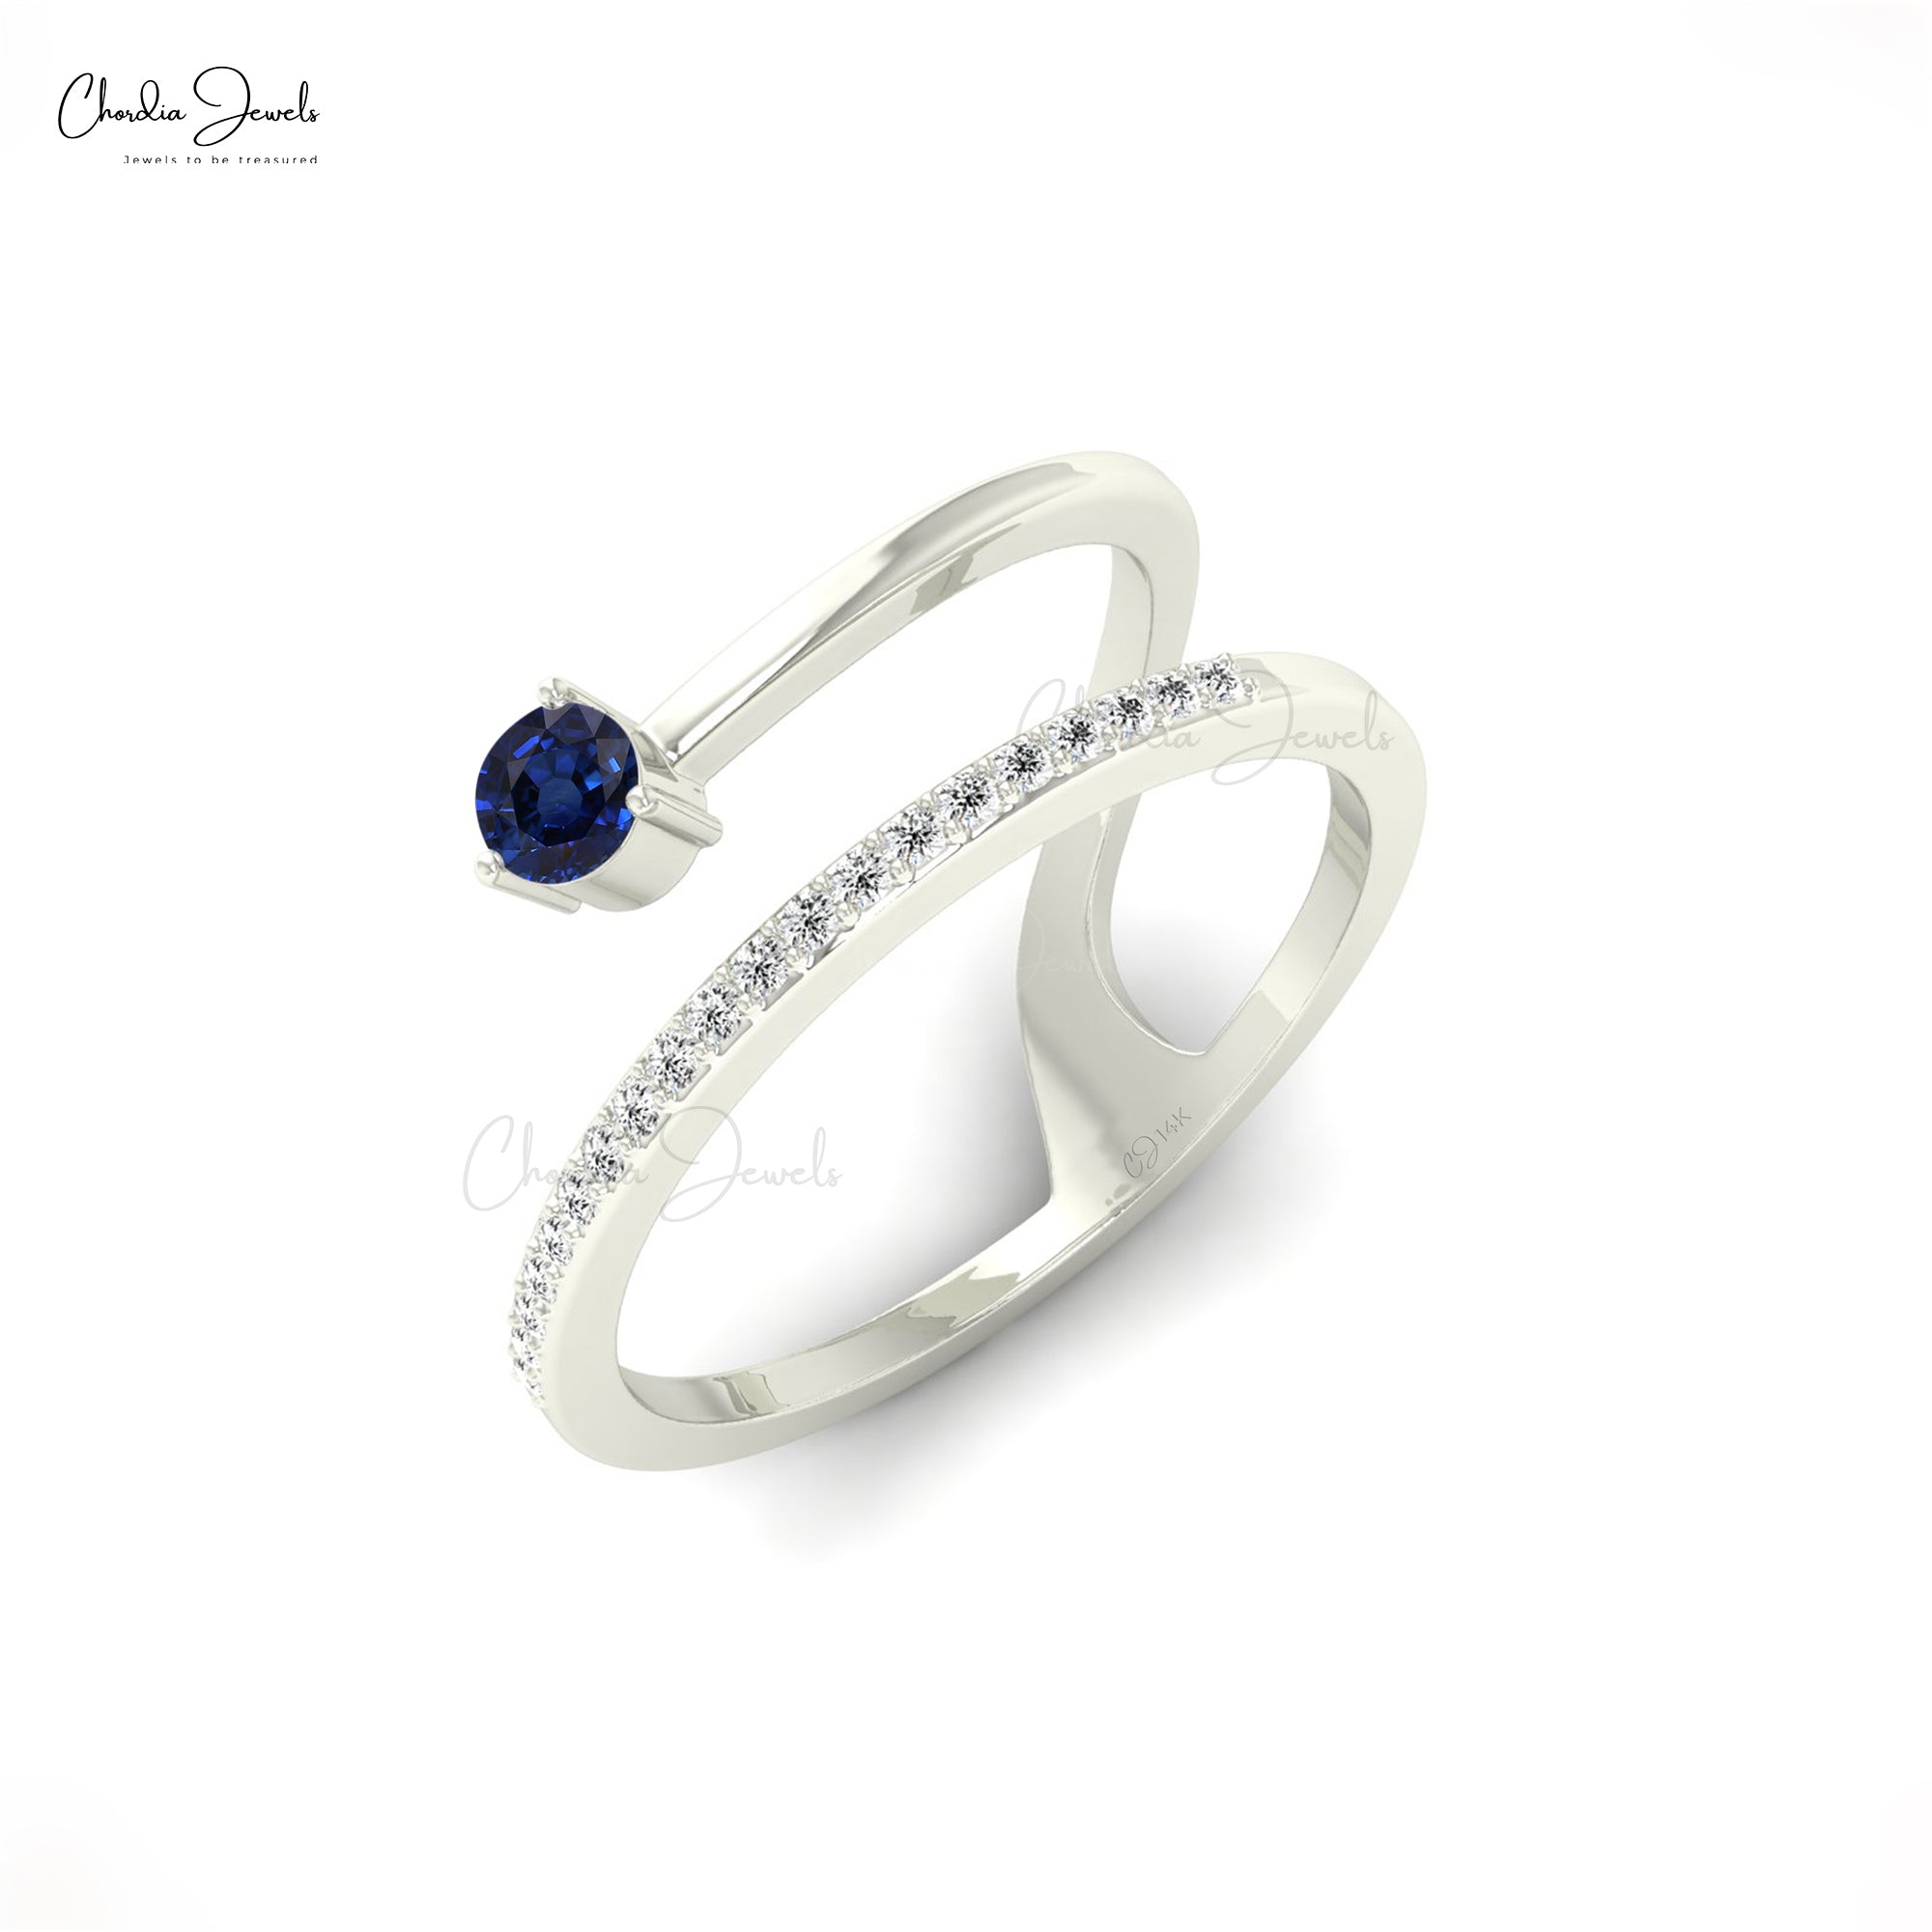 Statement 6 Carats Genuine Lab Grown Royal Blue Sapphire Ring, Oval 12×10mm Blue  Sapphire Halo Cocktail Ring, Princess Diana Engagement Ring